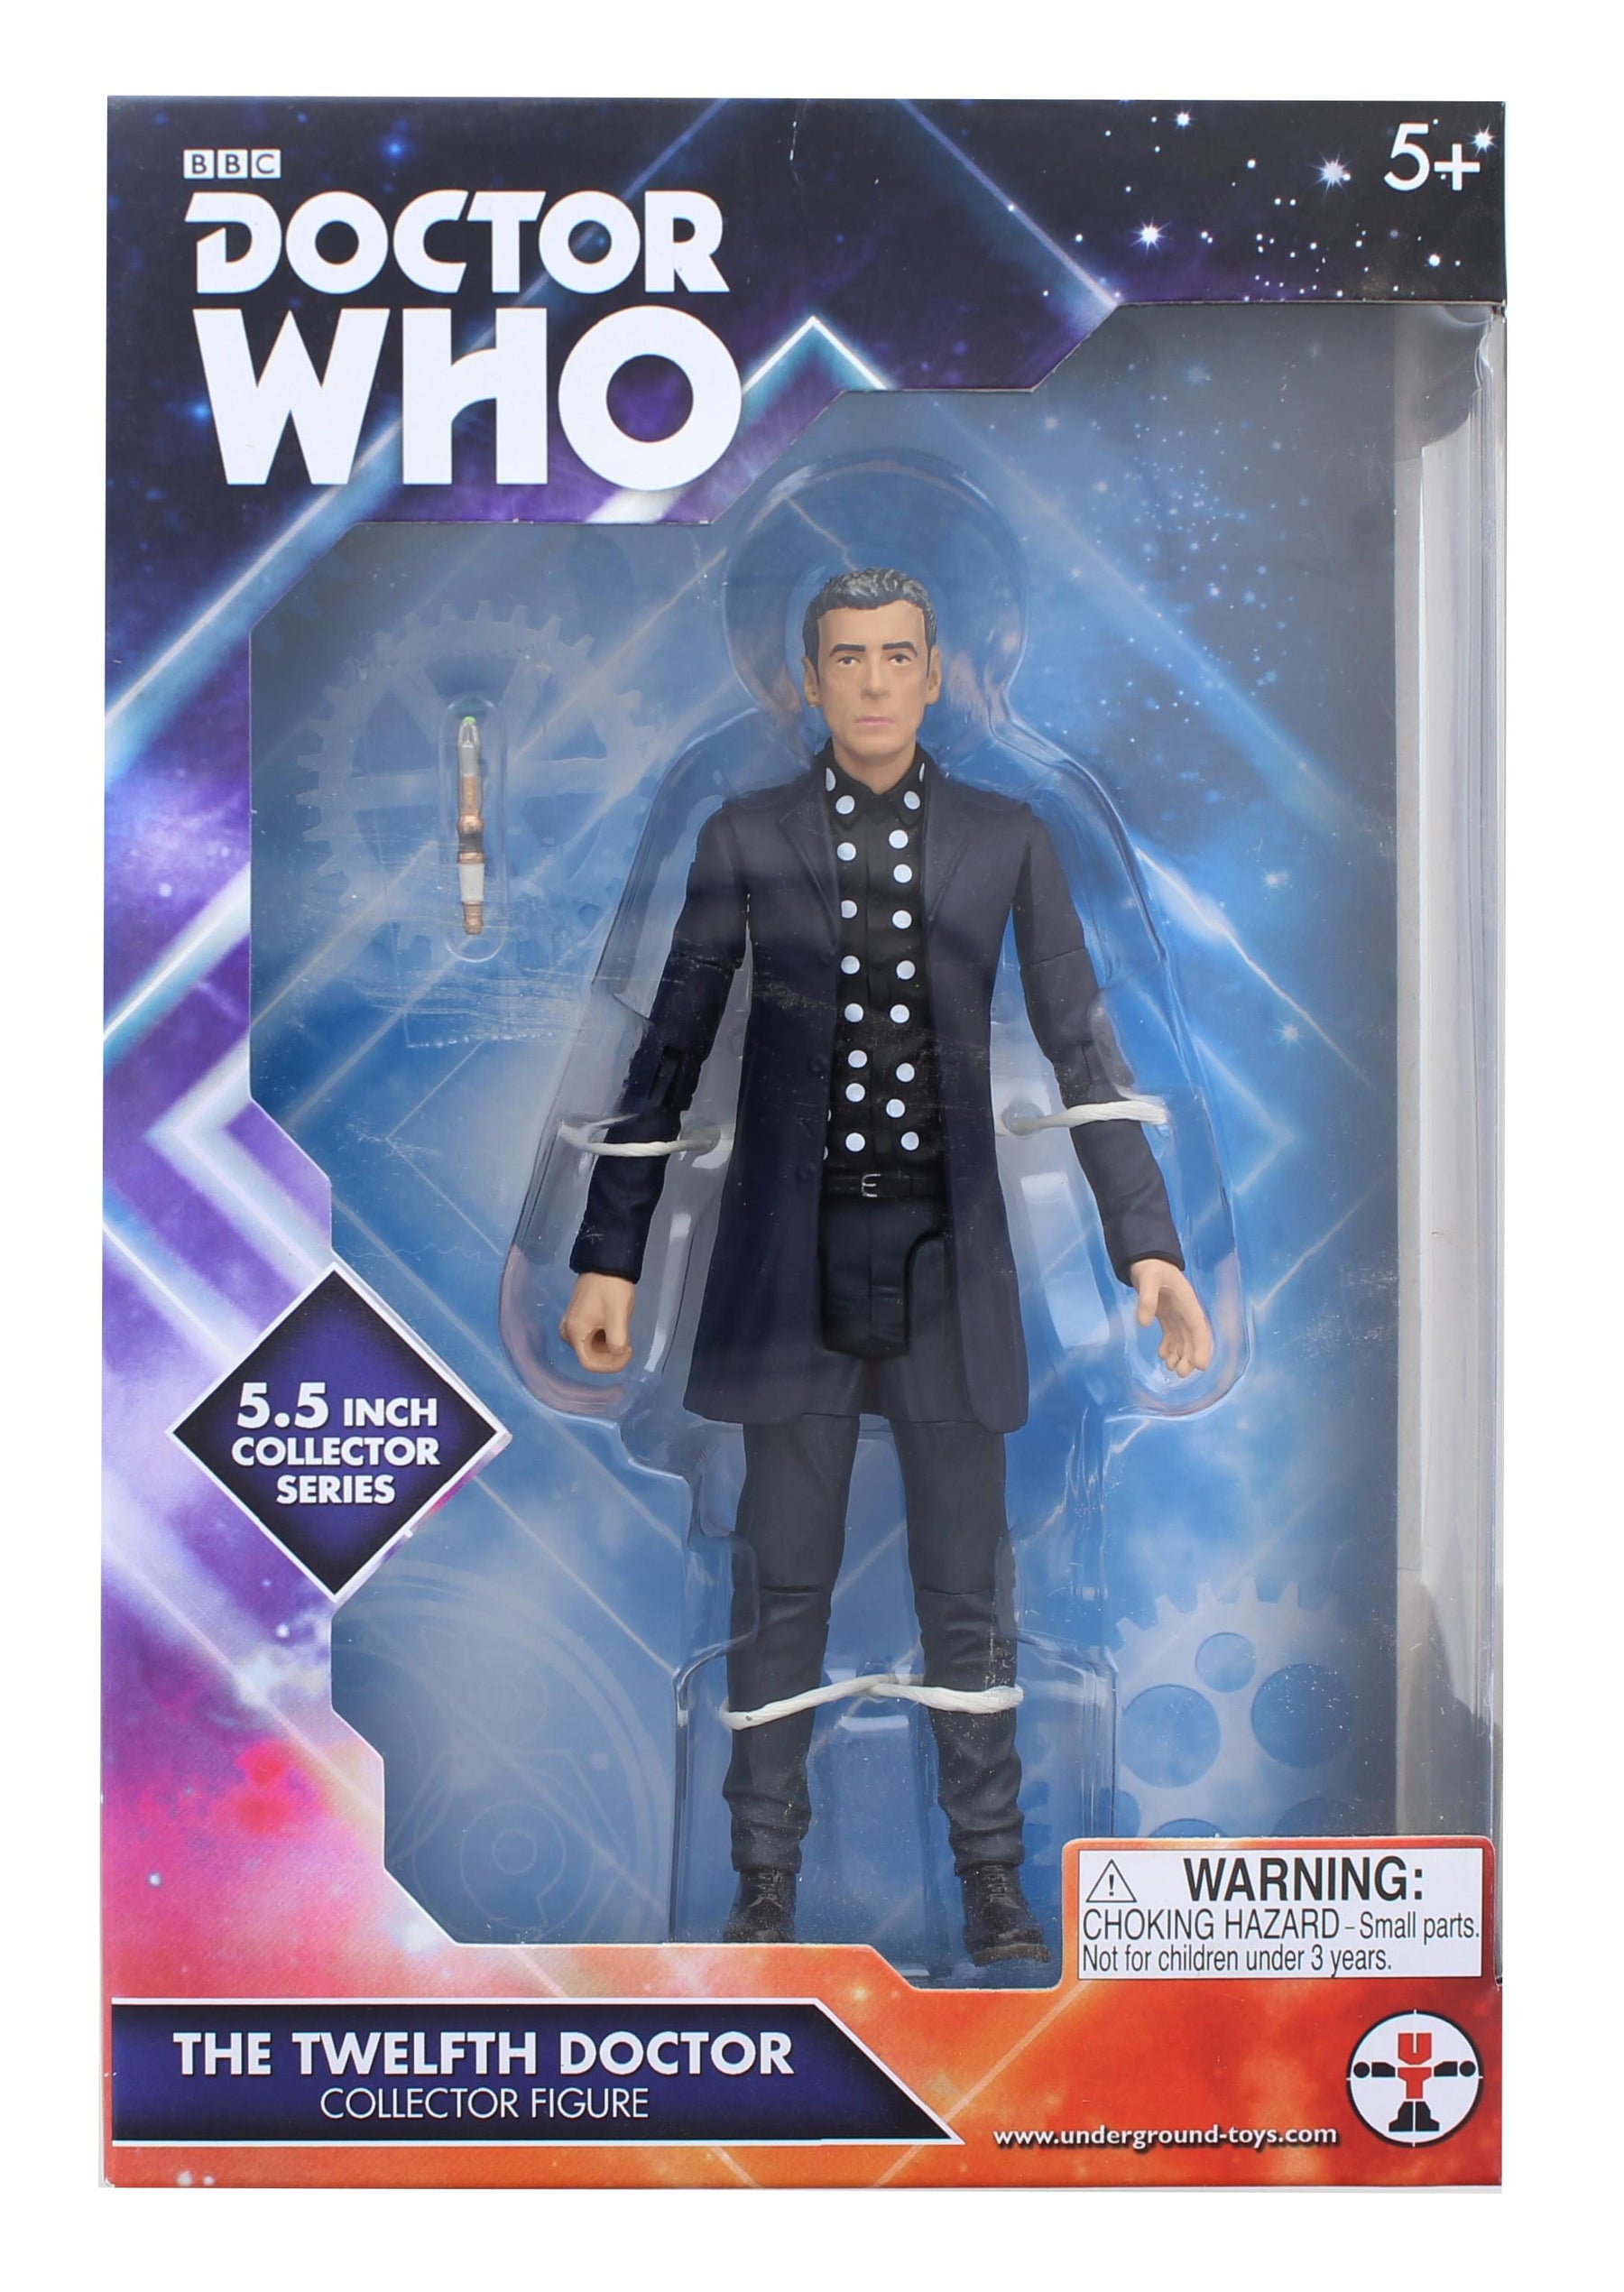 Doctor Who 12th Doctor in Polka Dot Shirt 5.5" Action Figure